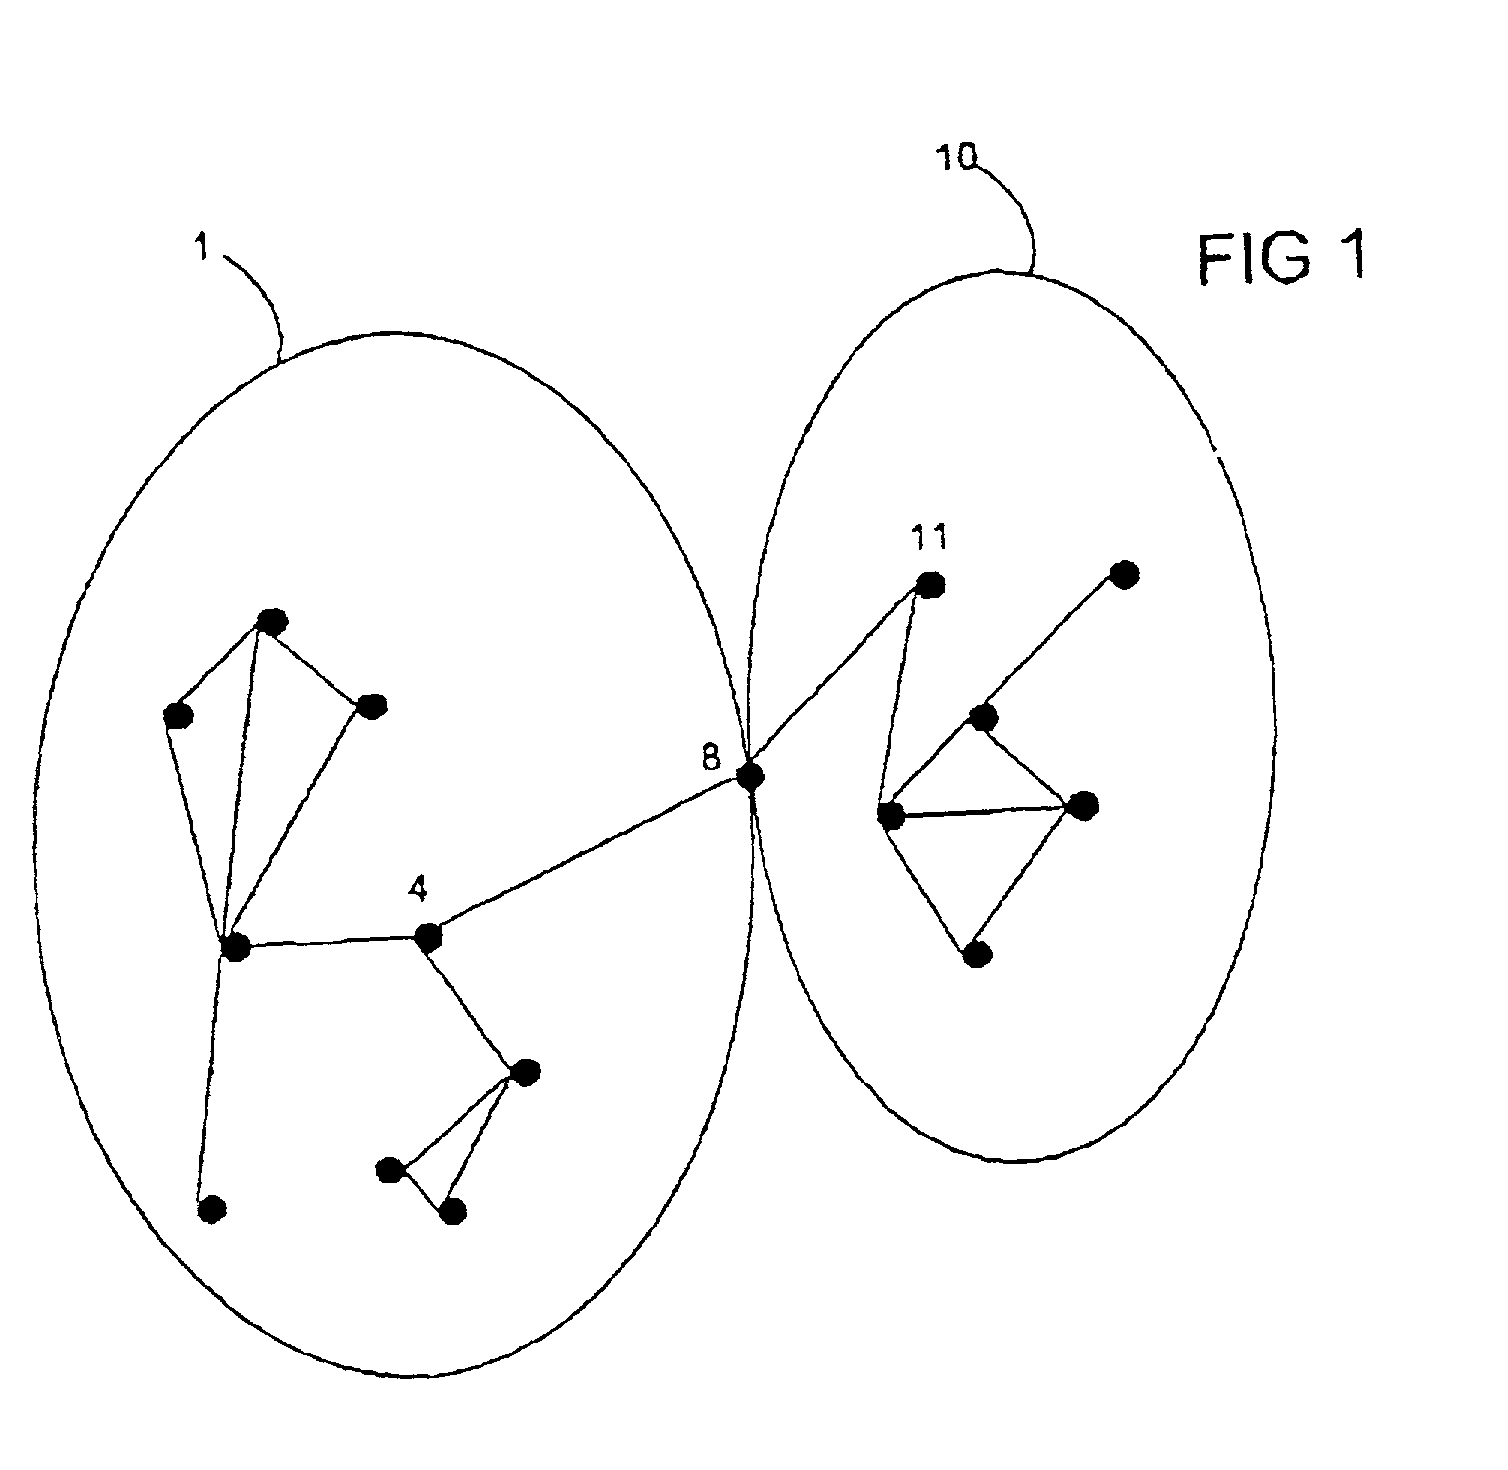 Method of communication between communications networks